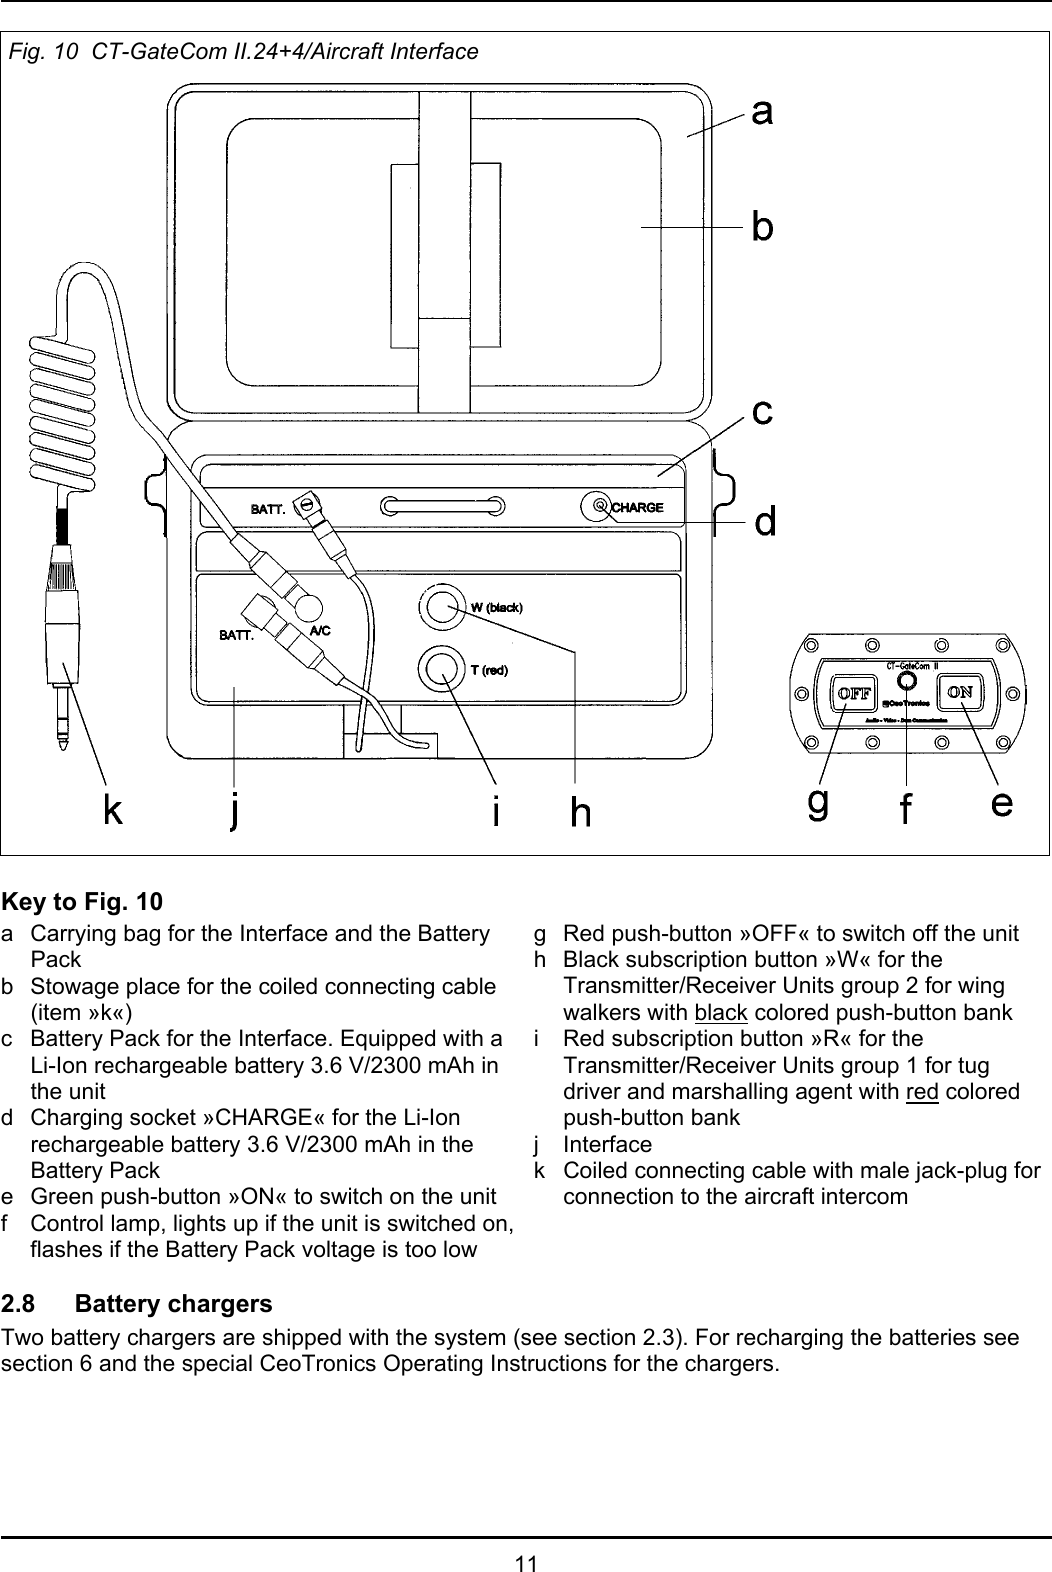 11Fig. 10  CT-GateCom II.24+4/Aircraft InterfaceKey to Fig. 10a Carrying bag for the Interface and the BatteryPackb Stowage place for the coiled connecting cable(item »k«)c Battery Pack for the Interface. Equipped with aLi-Ion rechargeable battery 3.6 V/2300 mAh inthe unitd Charging socket »CHARGE« for the Li-Ionrechargeable battery 3.6 V/2300 mAh in theBattery Packe Green push-button »ON« to switch on the unitf Control lamp, lights up if the unit is switched on,flashes if the Battery Pack voltage is too lowg Red push-button »OFF« to switch off the unith Black subscription button »W« for theTransmitter/Receiver Units group 2 for wingwalkers with black colored push-button banki Red subscription button »R« for theTransmitter/Receiver Units group 1 for tugdriver and marshalling agent with red coloredpush-button bankj Interfacek Coiled connecting cable with male jack-plug forconnection to the aircraft intercom2.8 Battery chargersTwo battery chargers are shipped with the system (see section 2.3). For recharging the batteries seesection 6 and the special CeoTronics Operating Instructions for the chargers. 